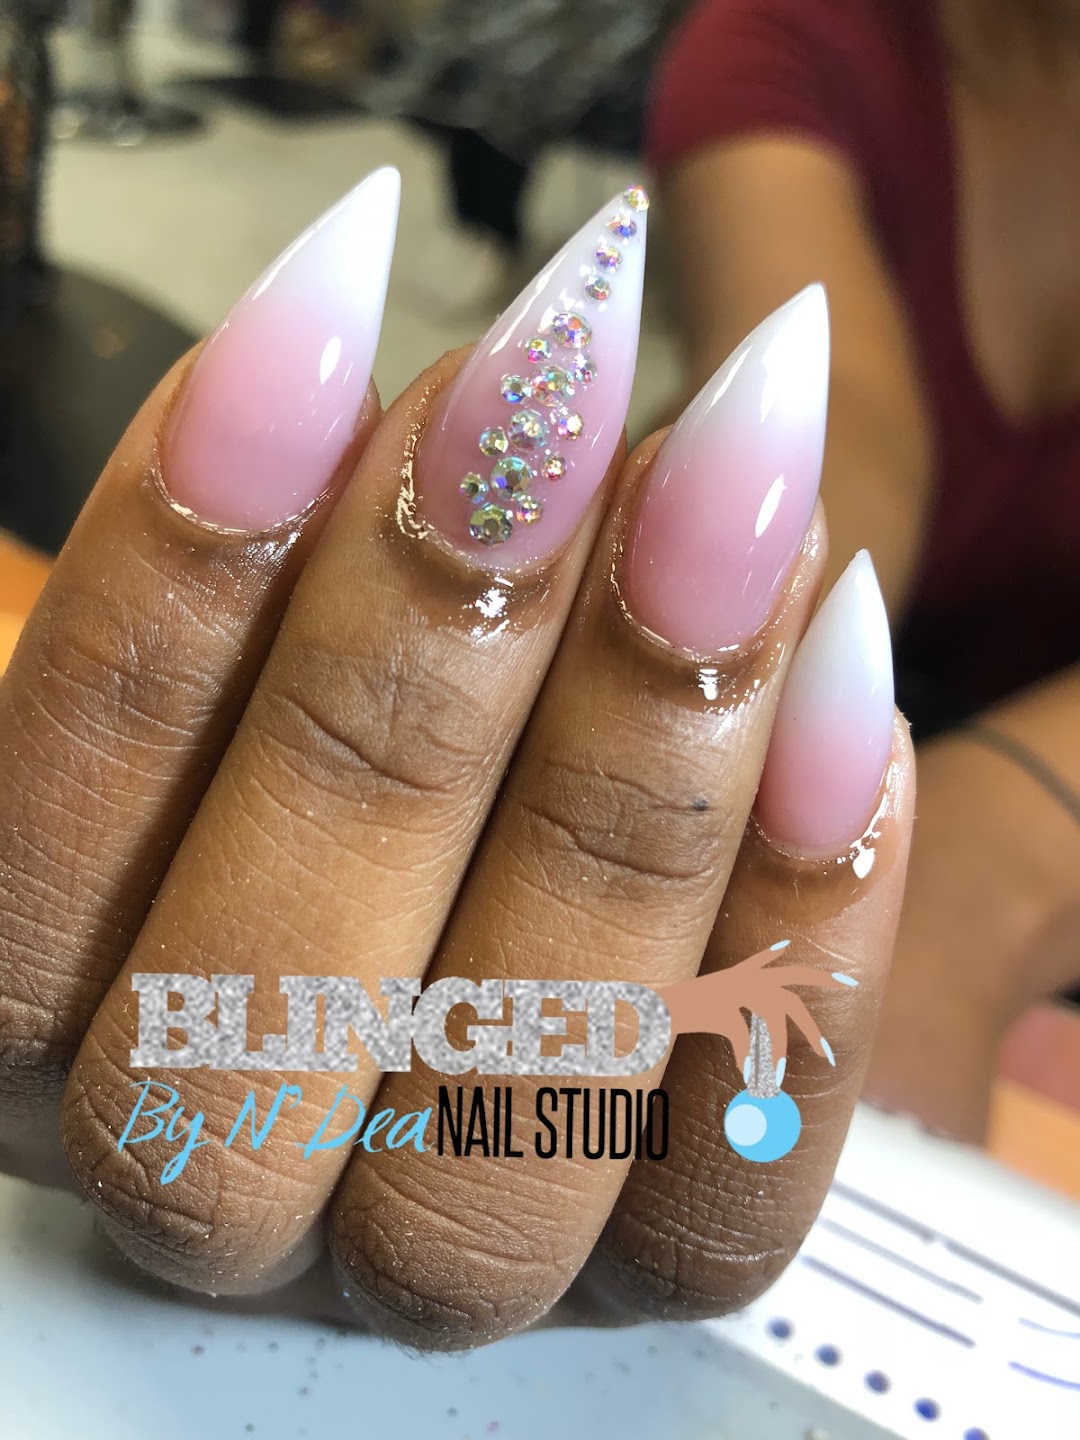 Blinged by NDea Nail Studio